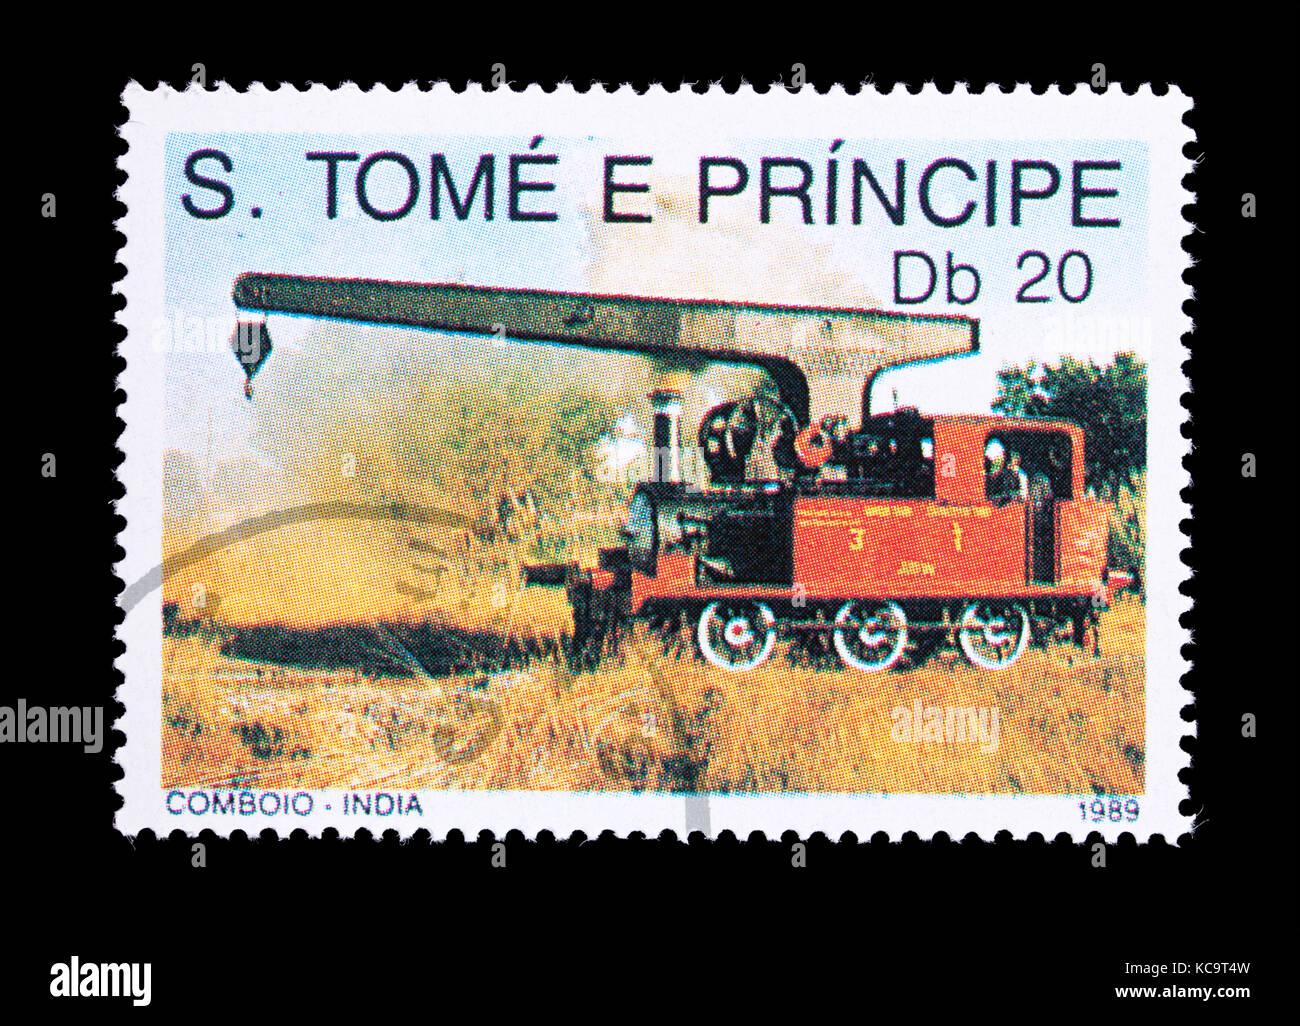 Postage stamp from the Saint Thomas and Prince Islands depicting a Indian railway crane Stock Photo